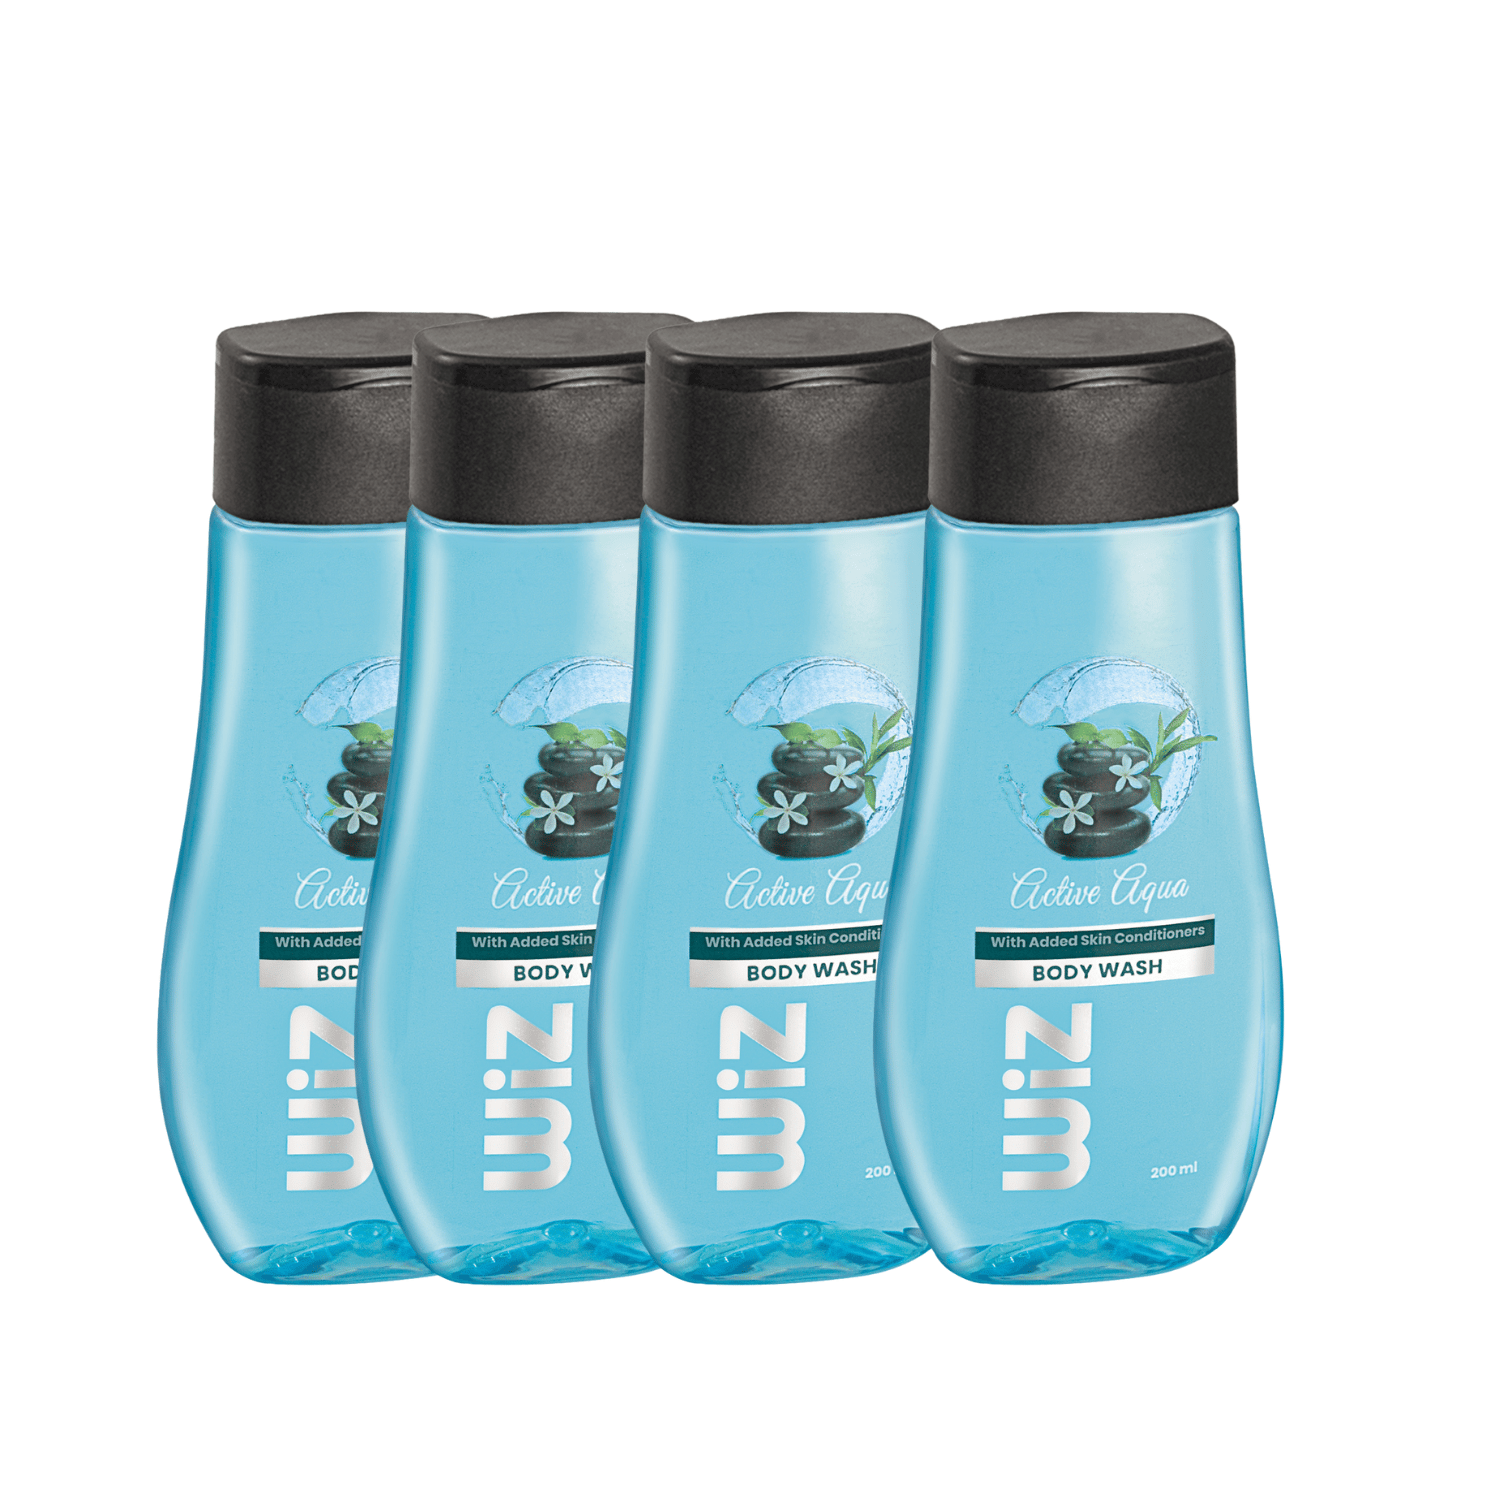 Wiz Active Aqua Classic Body Wash Flip Top Bottle - 200ml Pack of 4, Shower Gel with Pleasing Aroma, Added Skin Conditioners for Smooth Skin